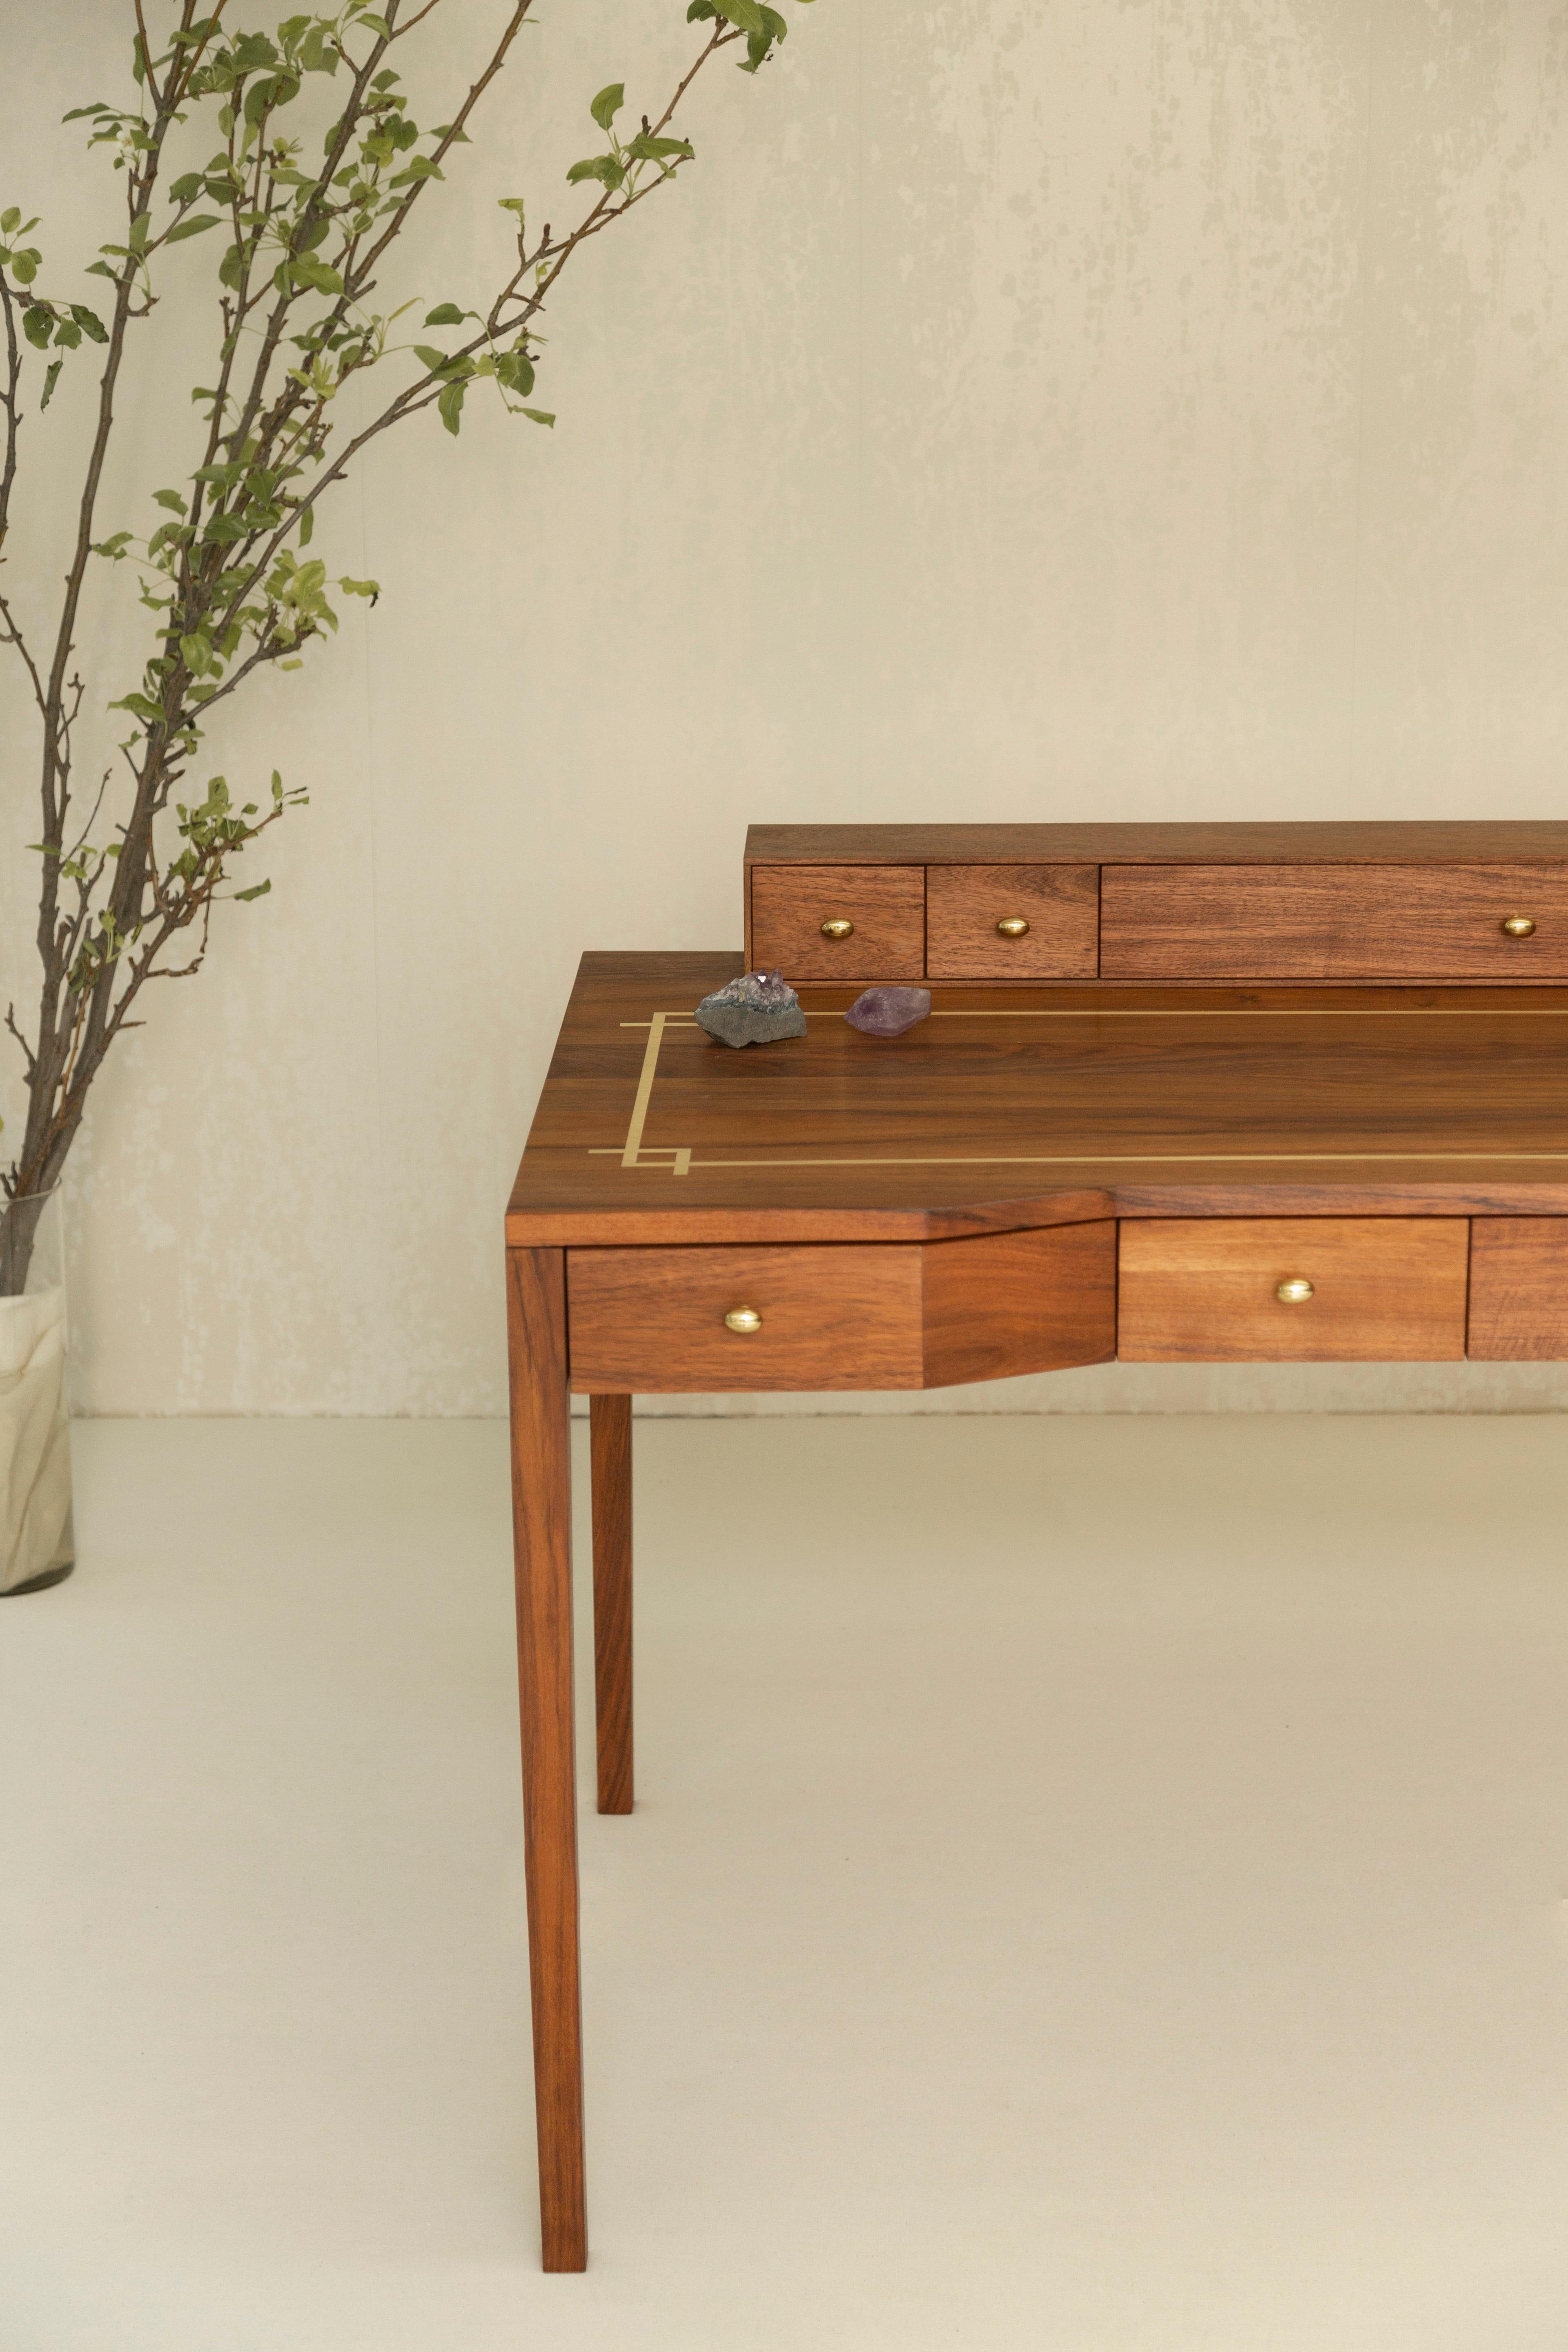 The Virginia desk was inspired by one of our favorite authors. It has features that pay homage to the love of collecting pens and small articles. Their ir a beautiful brass inlay that marks the space of creativity and creation. The desk is wide